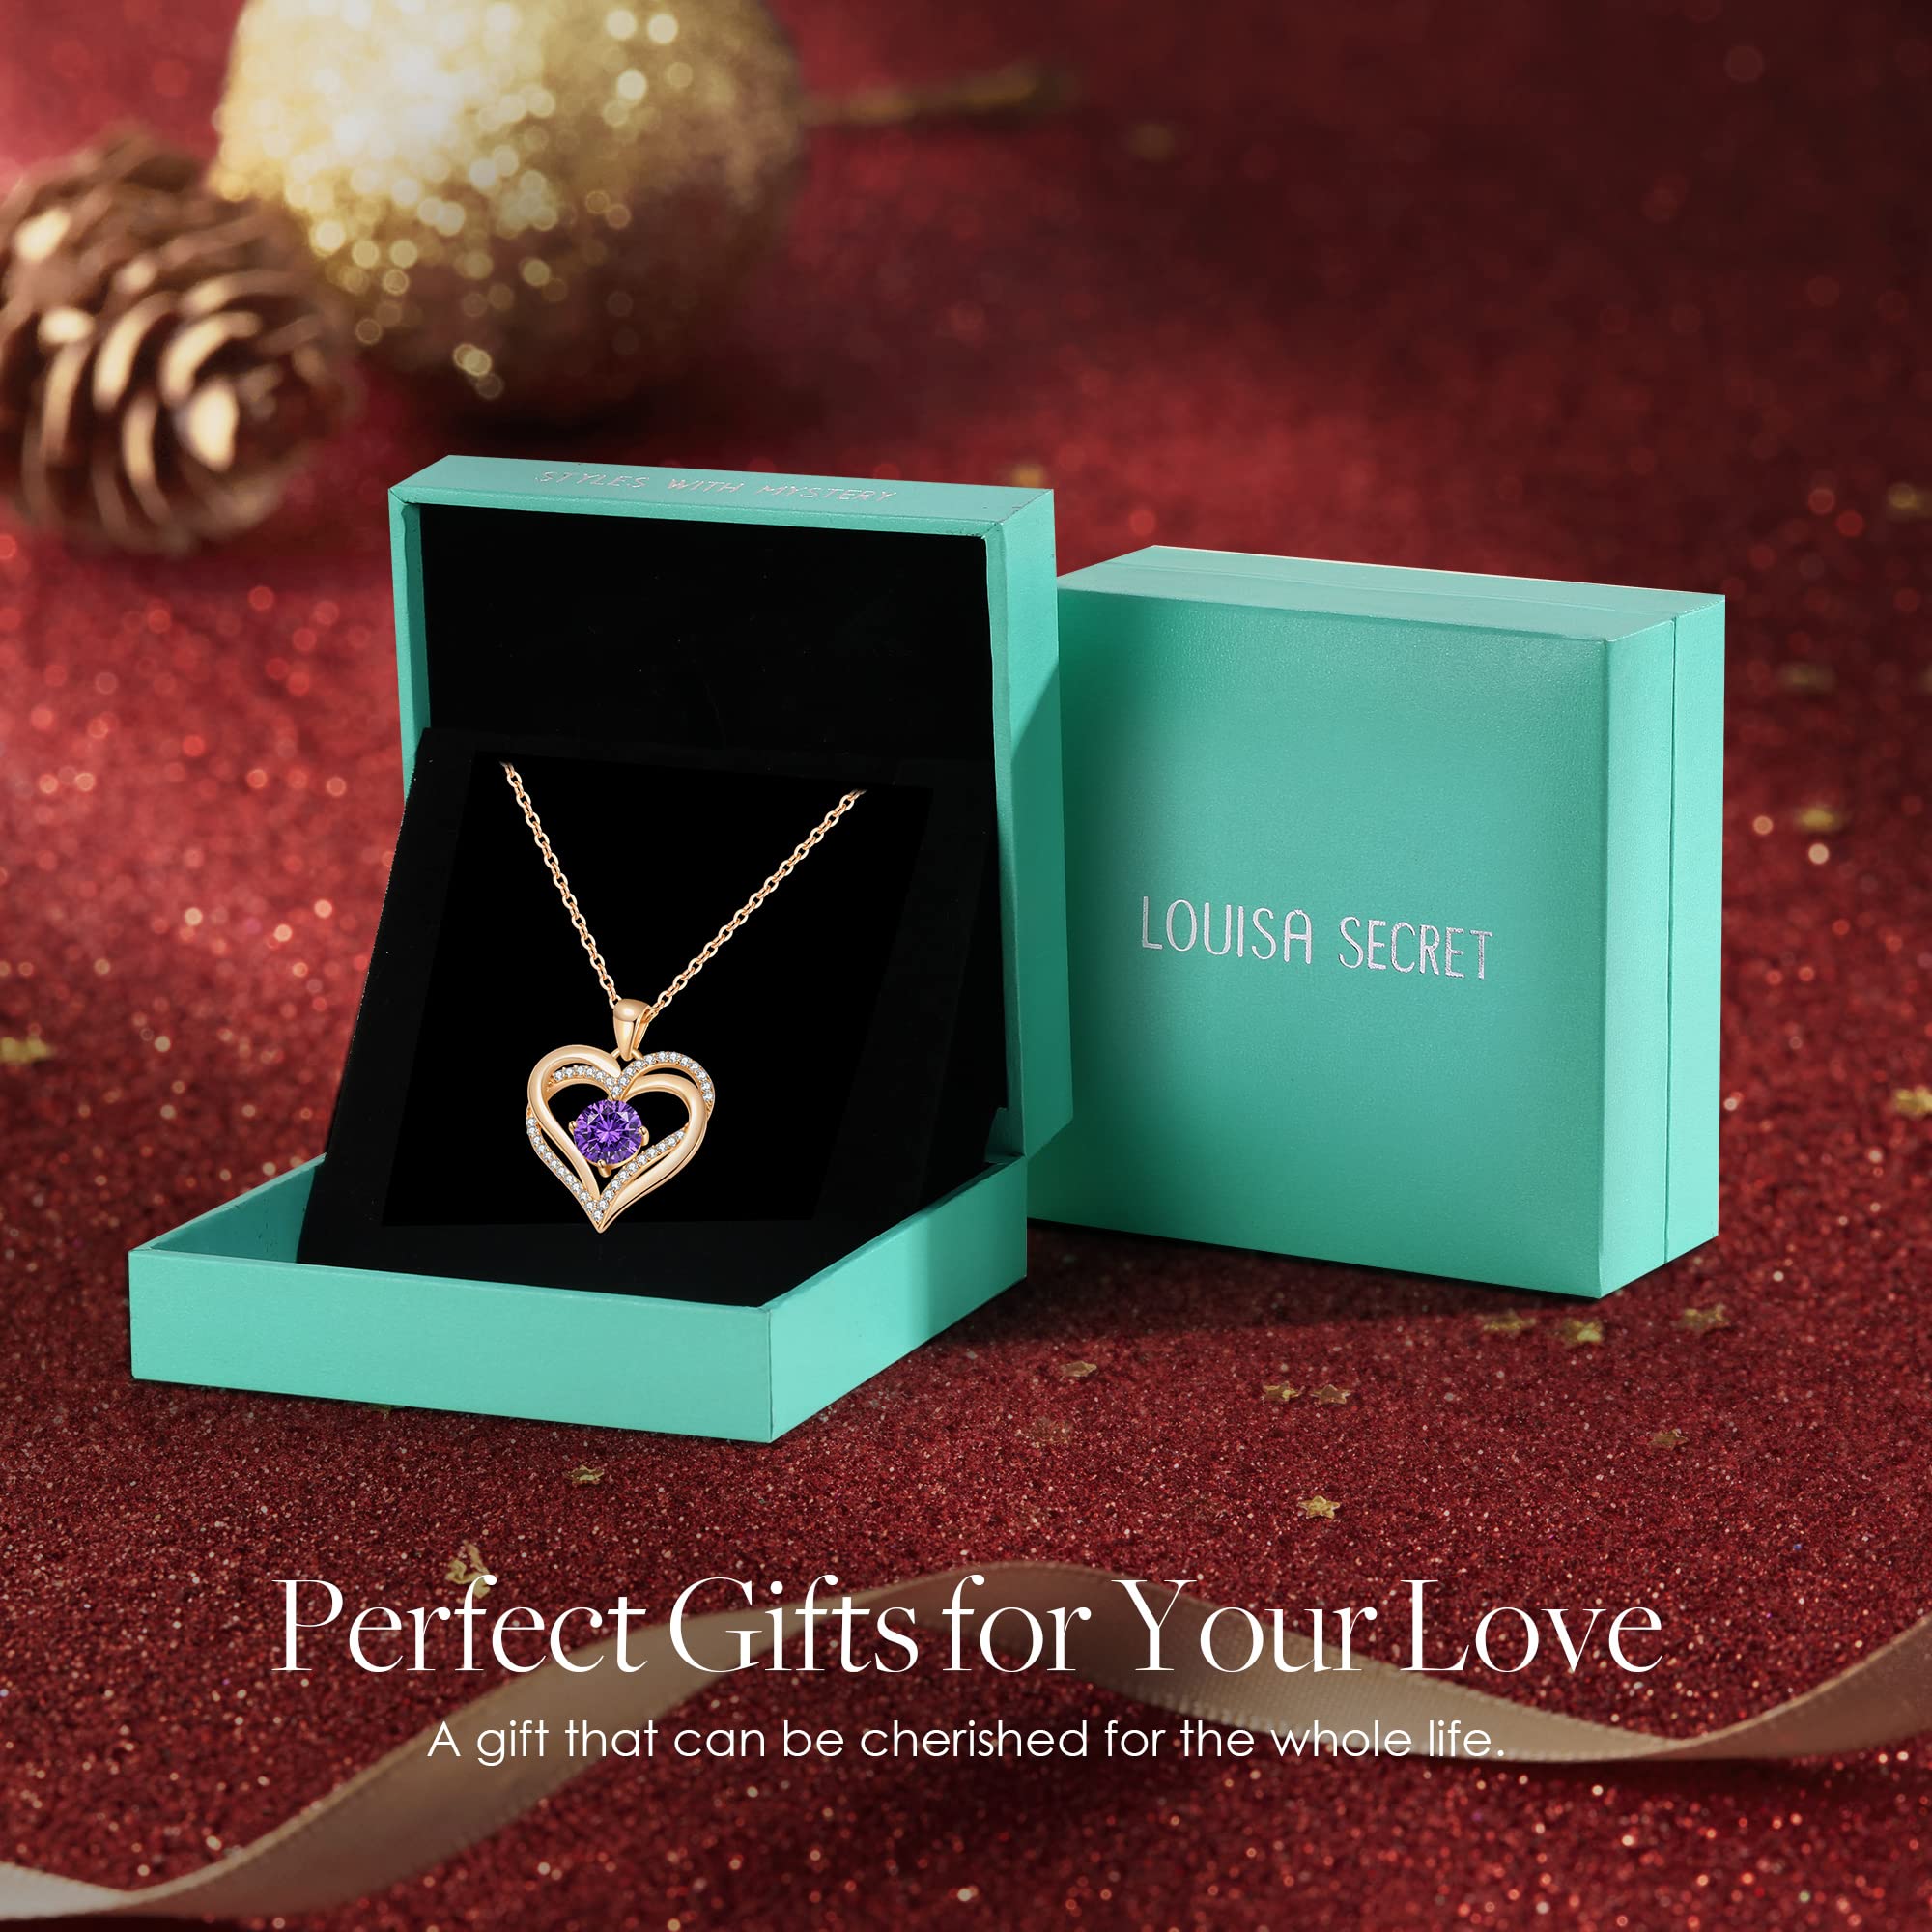 LOUISA SECRET Love Heart Birthstone Necklaces for Women, 925 Sterling Silver Women Pendant Necklace, Mother’s Day Birthday Anniversary Jewelry Gift for Woman Mother Mom Wife Her Girlfriend Girl